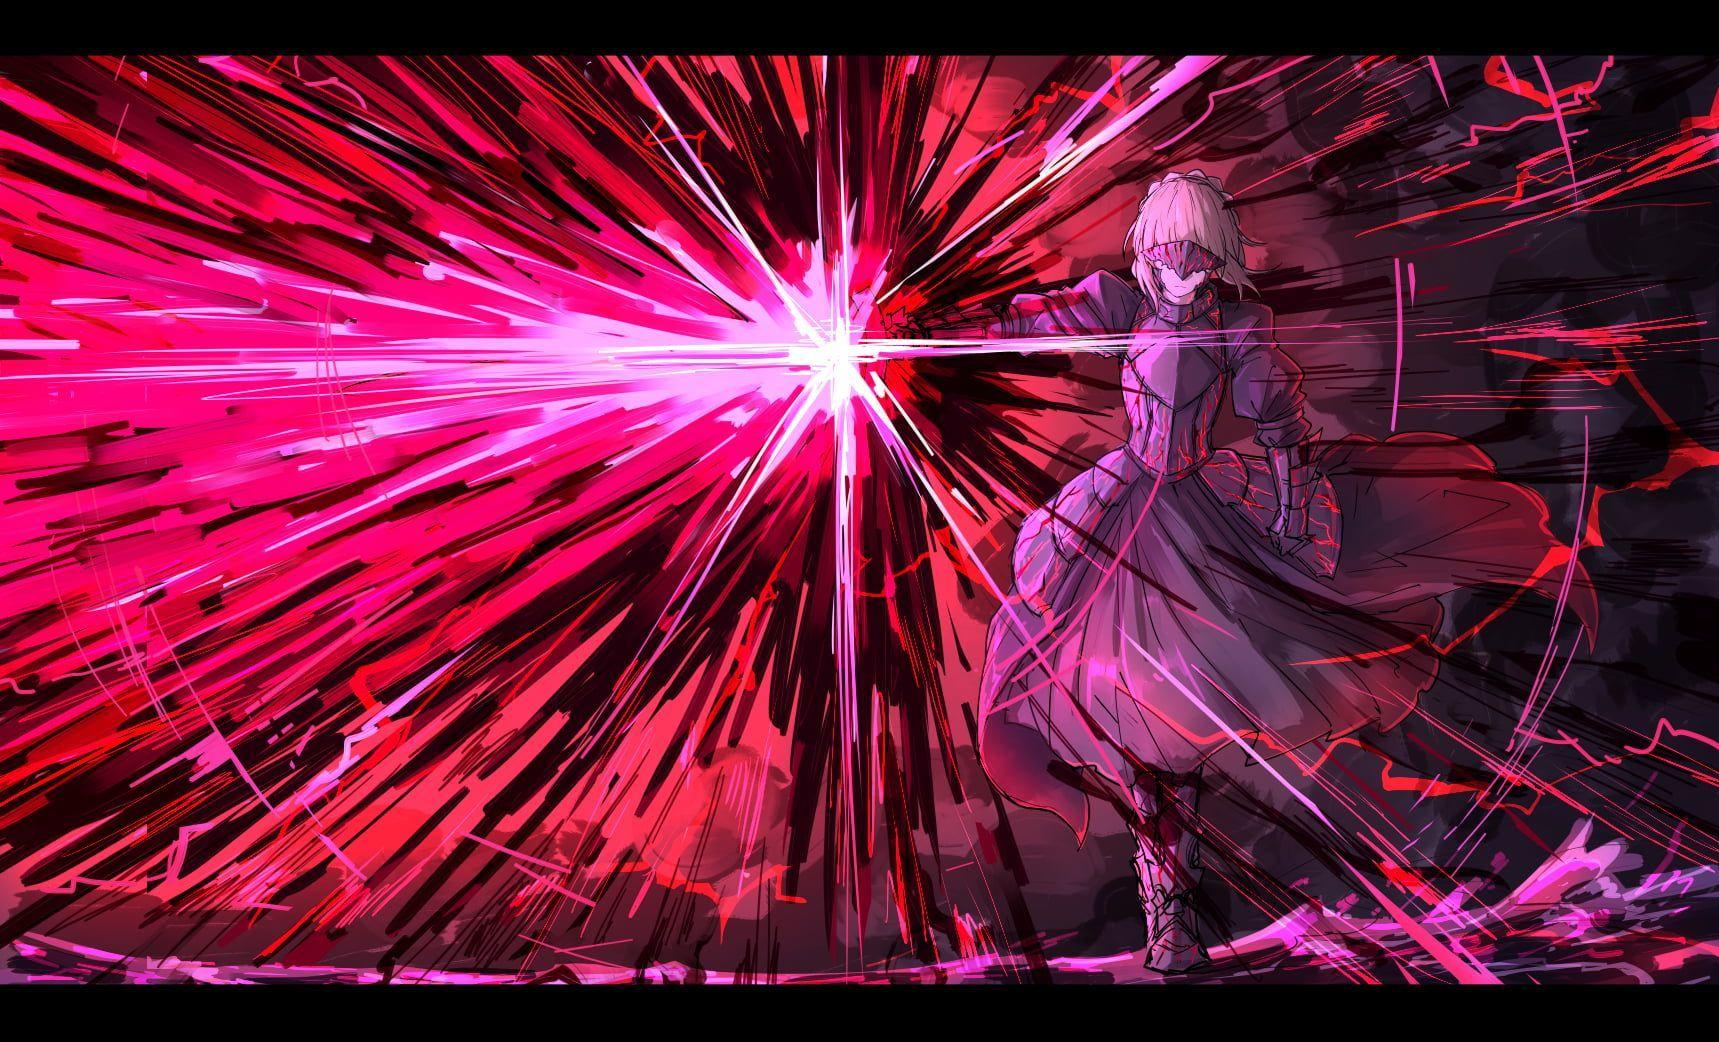 Fate Stay Night Anime Wallpapers Top Free Fate Stay Night Anime Backgrounds Wallpaperaccess 8320